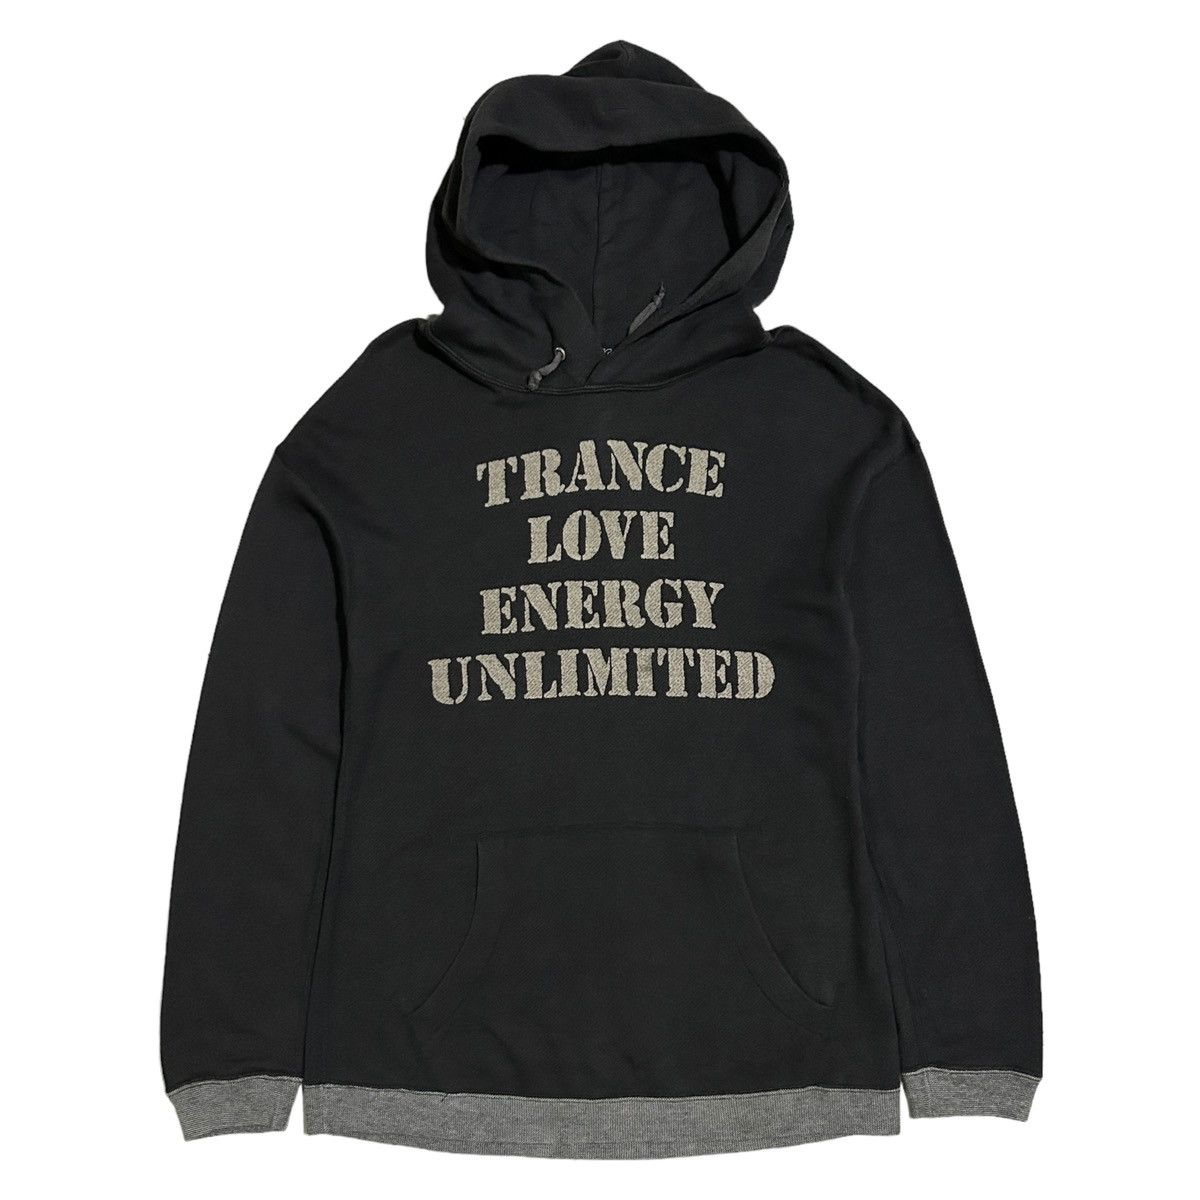 Hysteric Glamour 1990s Hysteric Glamour - Trance Love Energy